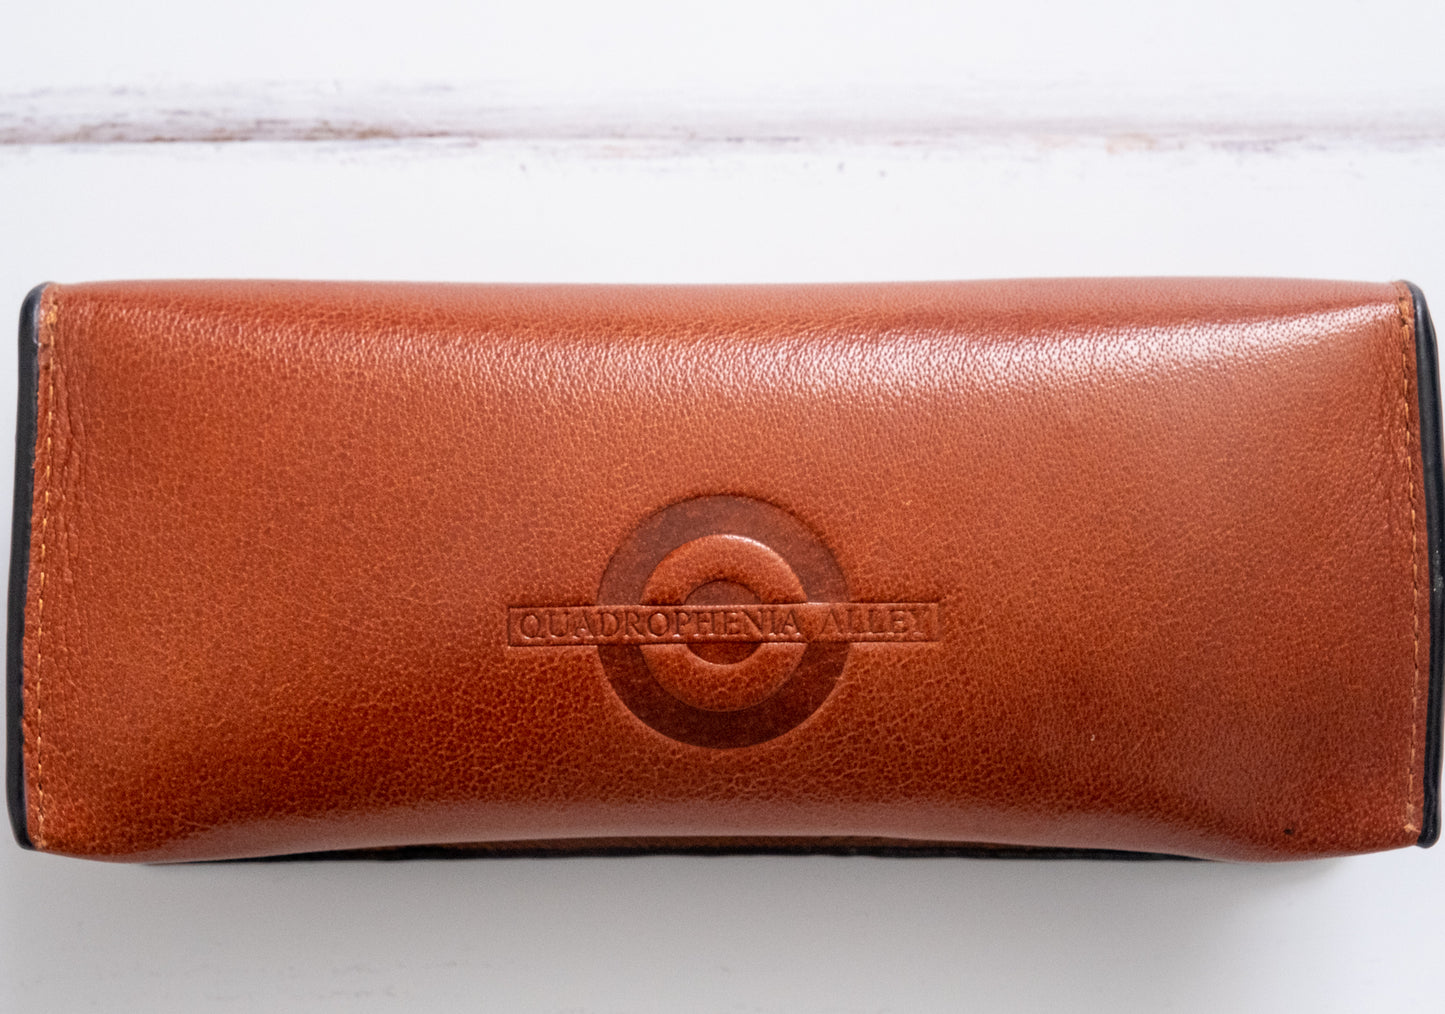 Quadrophenia Alley Exclusive Mod Target Leather Flap Over Glasses Case Brown